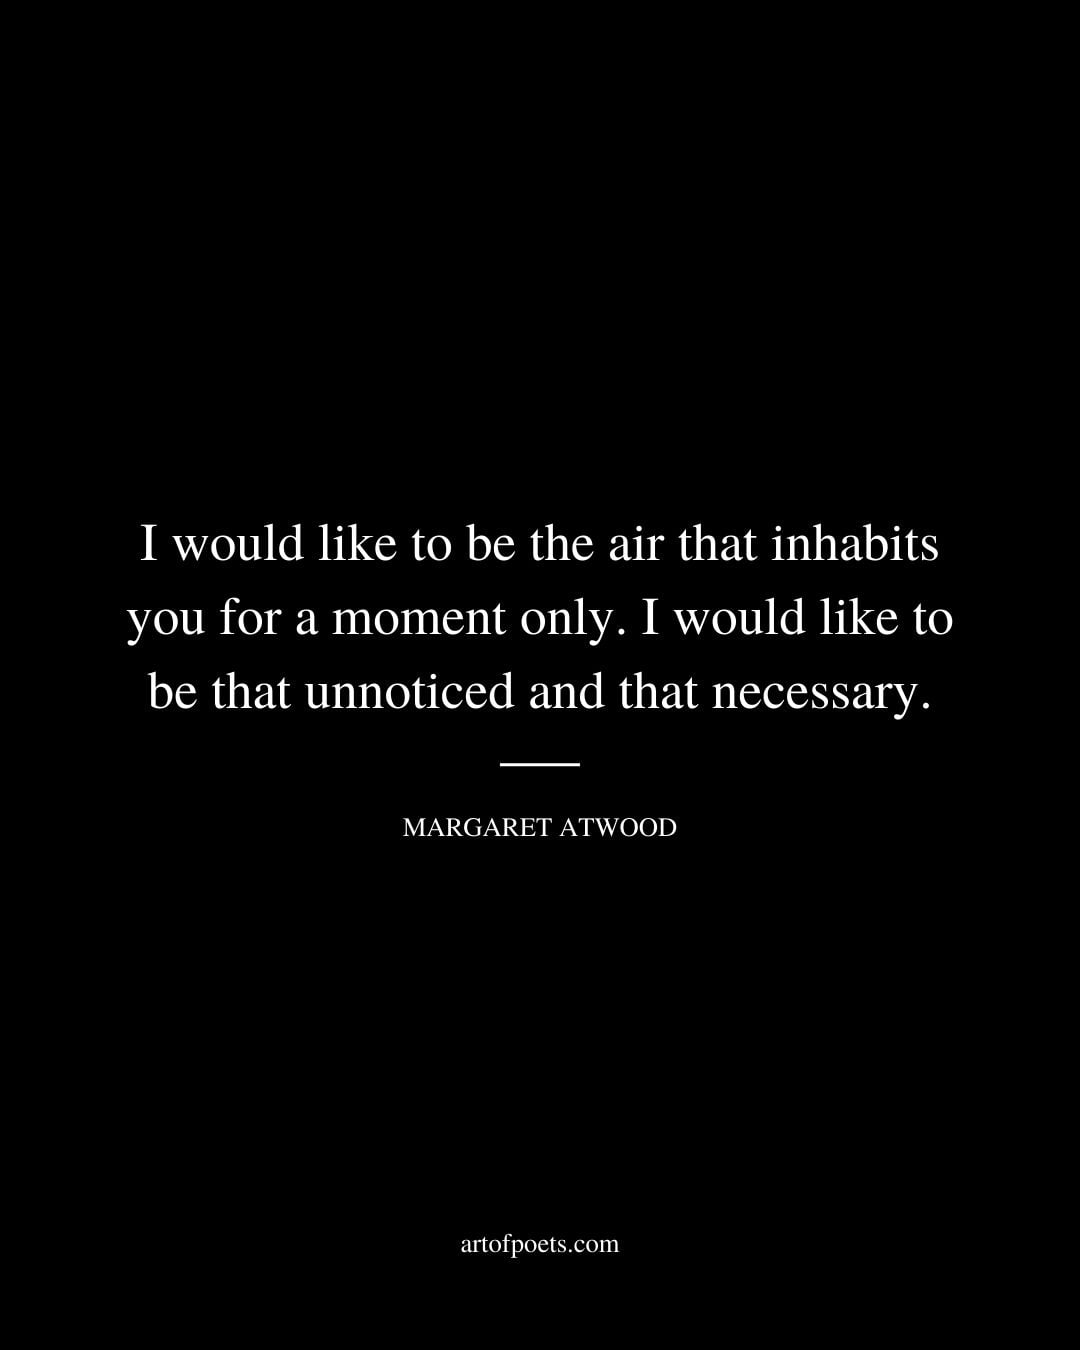 I would like to be the air that inhabits you for a moment only. I would like to be that unnoticed and that necessary